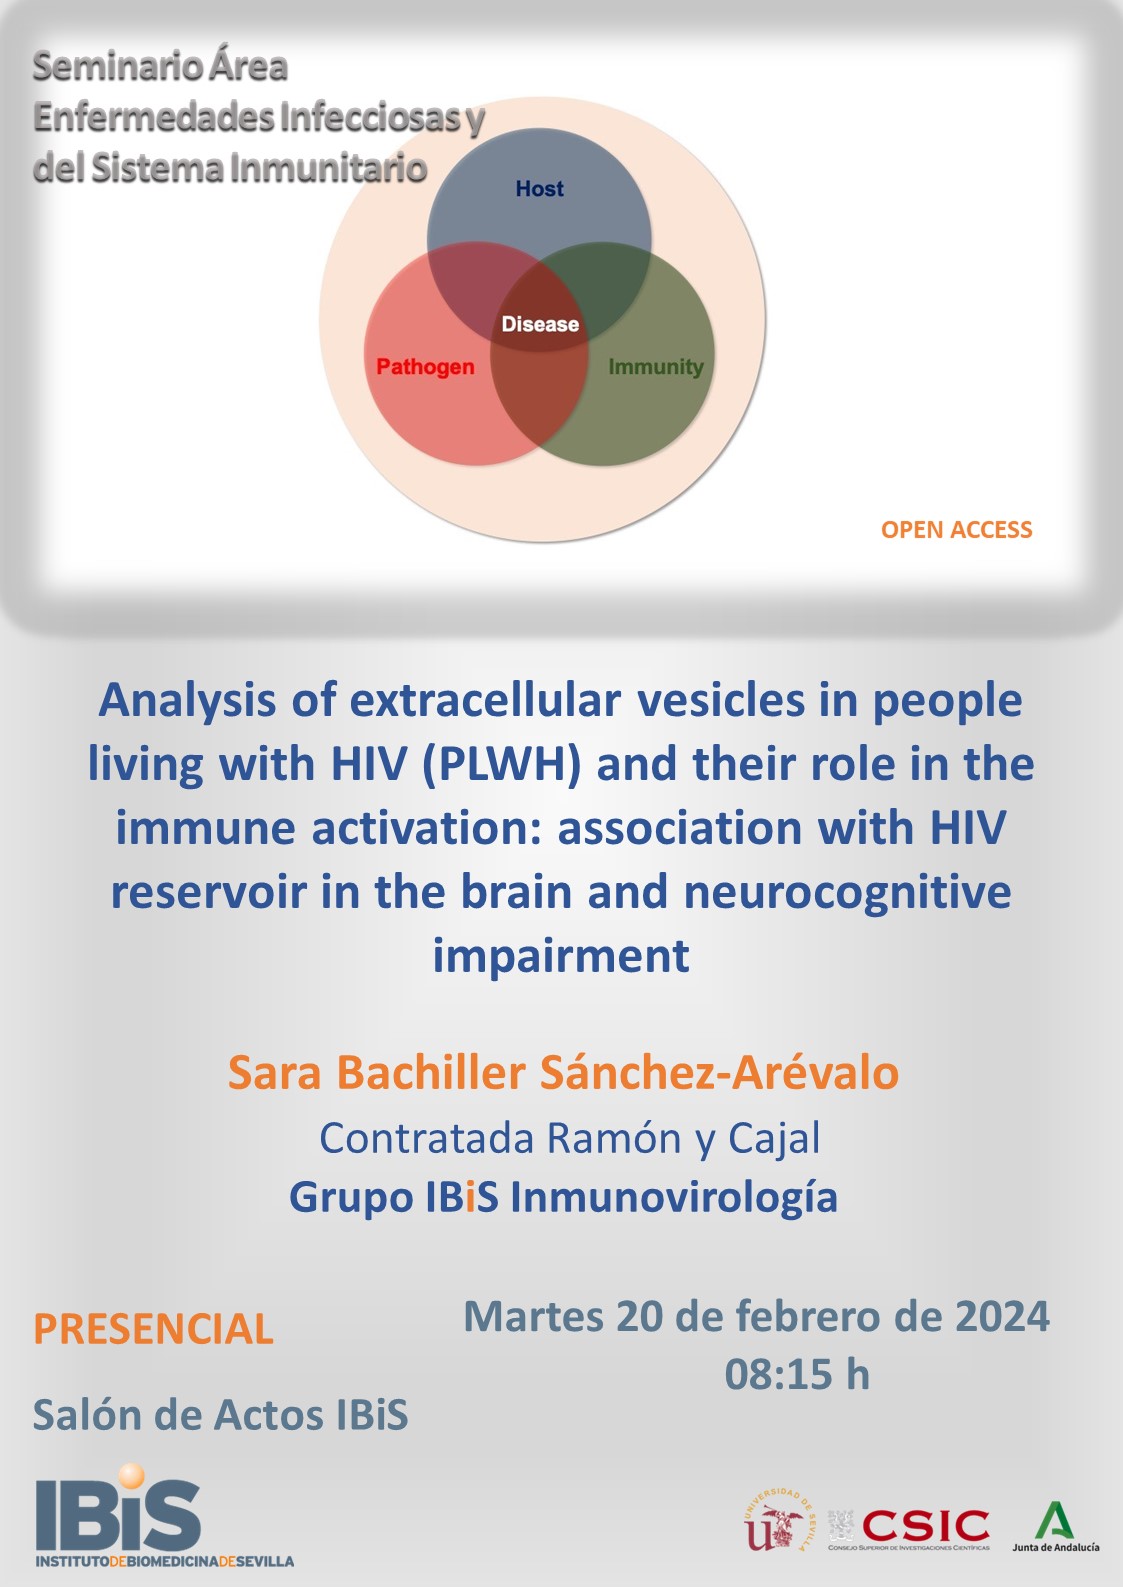 Poster: Analysis of extracellular vesicles in people living with HIV (PLWH) and their role in the immune activation: association with HIV reservoir in the brain and neurocognitive impairment